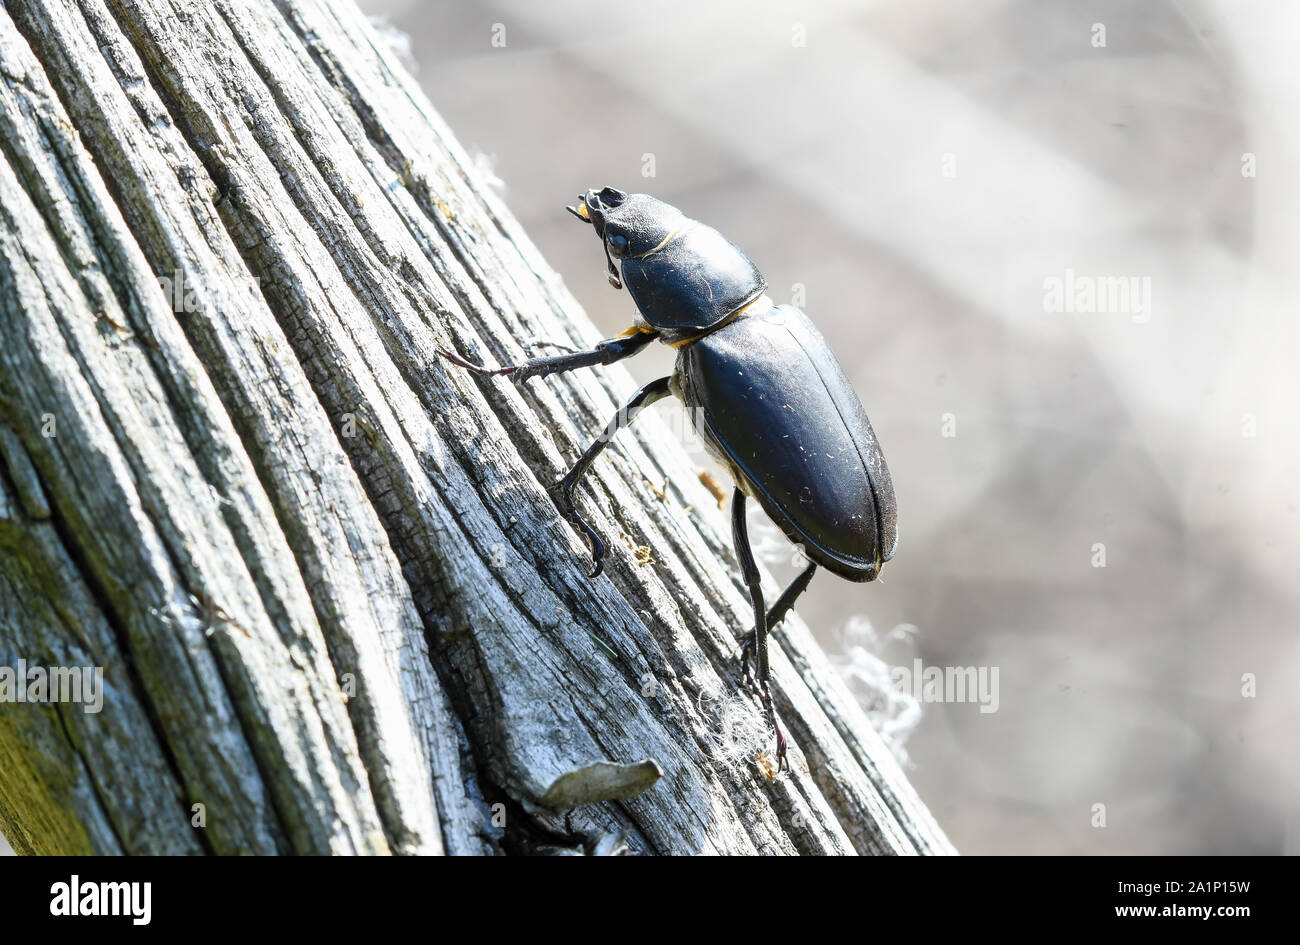 close-up of a female European stag beetle Stock Photo